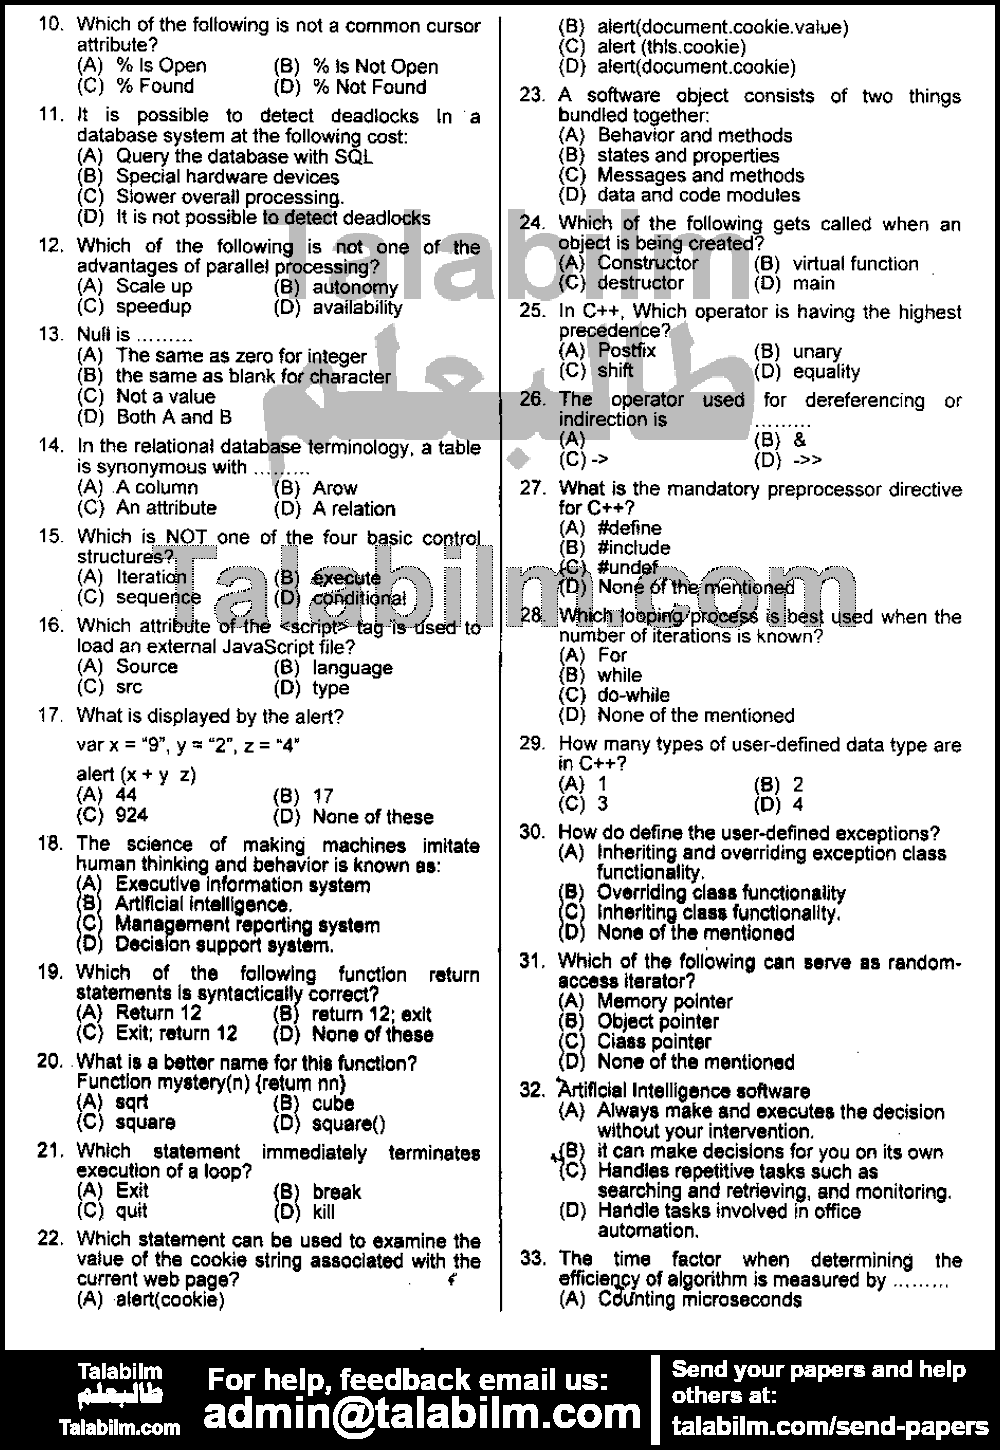 Computer Programmer Or Data Control Officer 0 past paper for 2015 Page No. 2